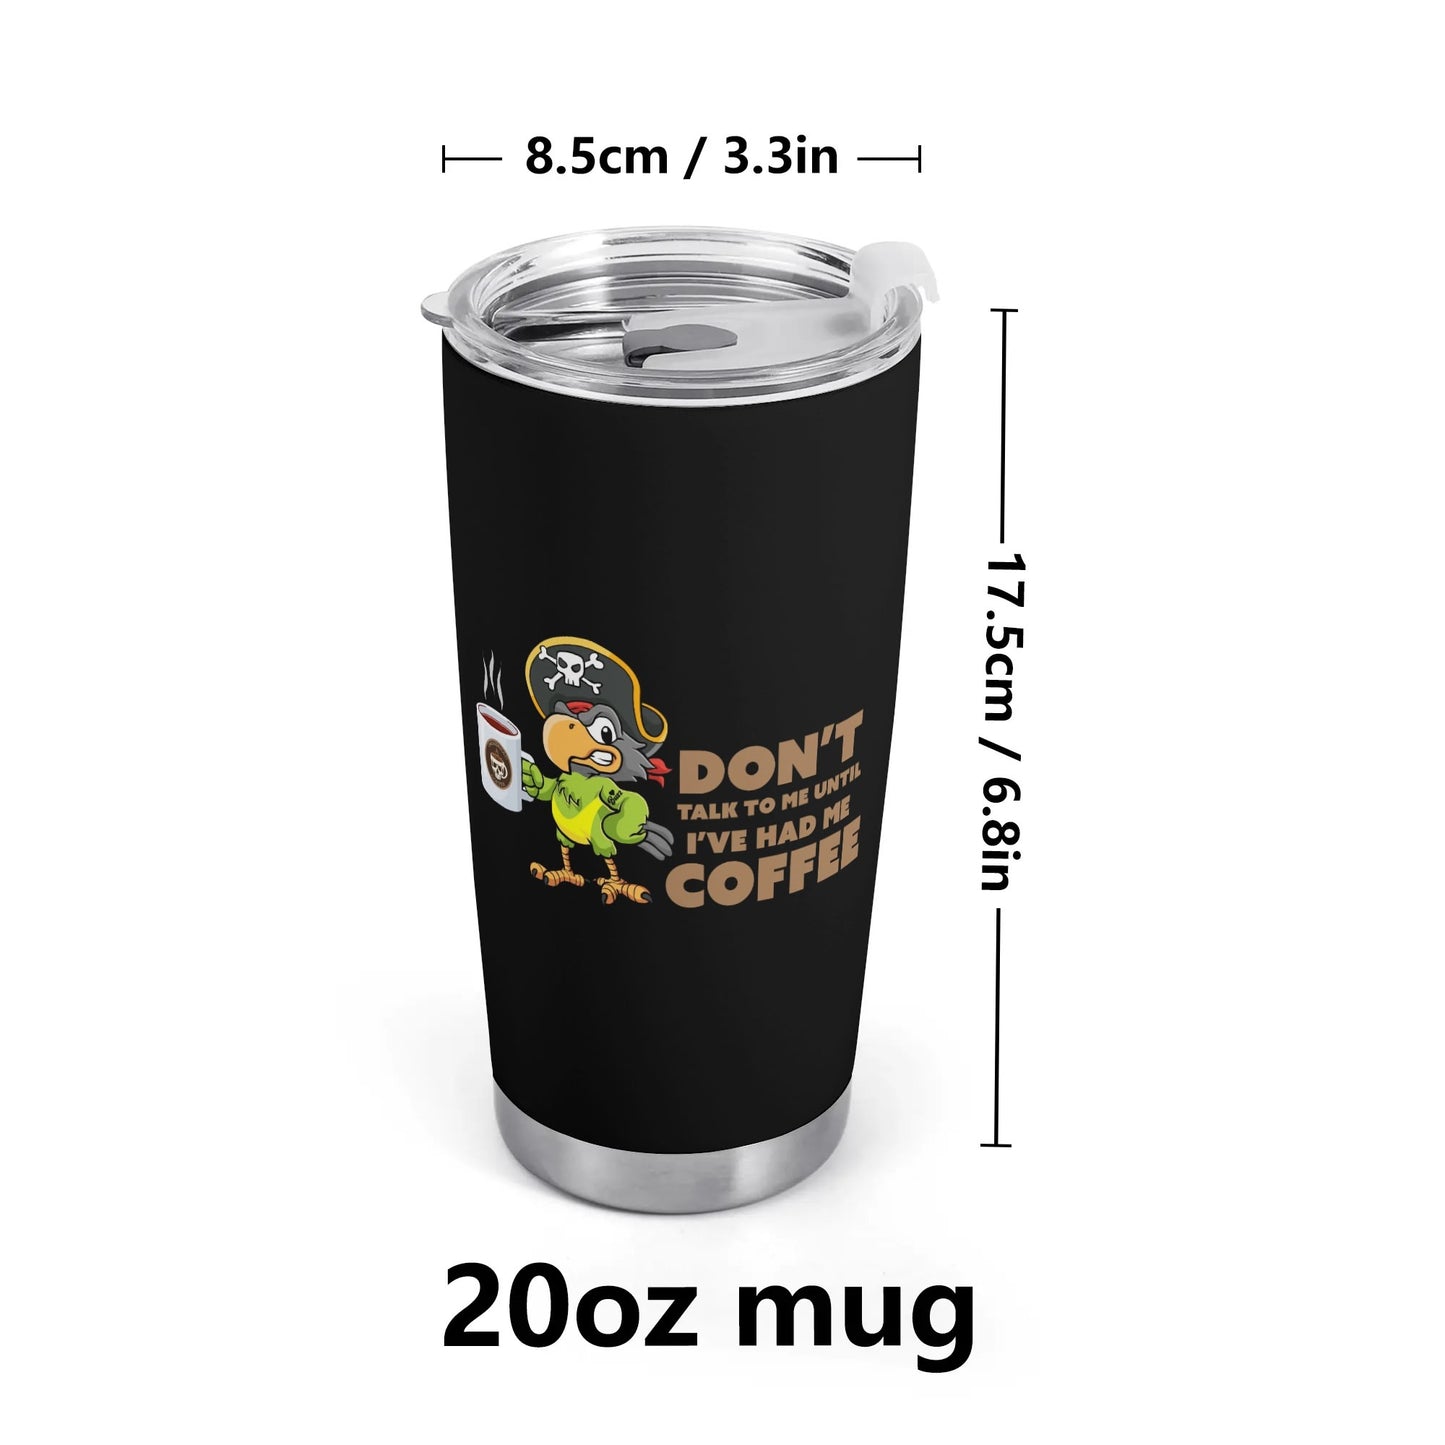 Dont Talk to Me Until Ive Had My Coffee Tumbler - All Over Printing Car Tumbler 20oz - Free Shipping